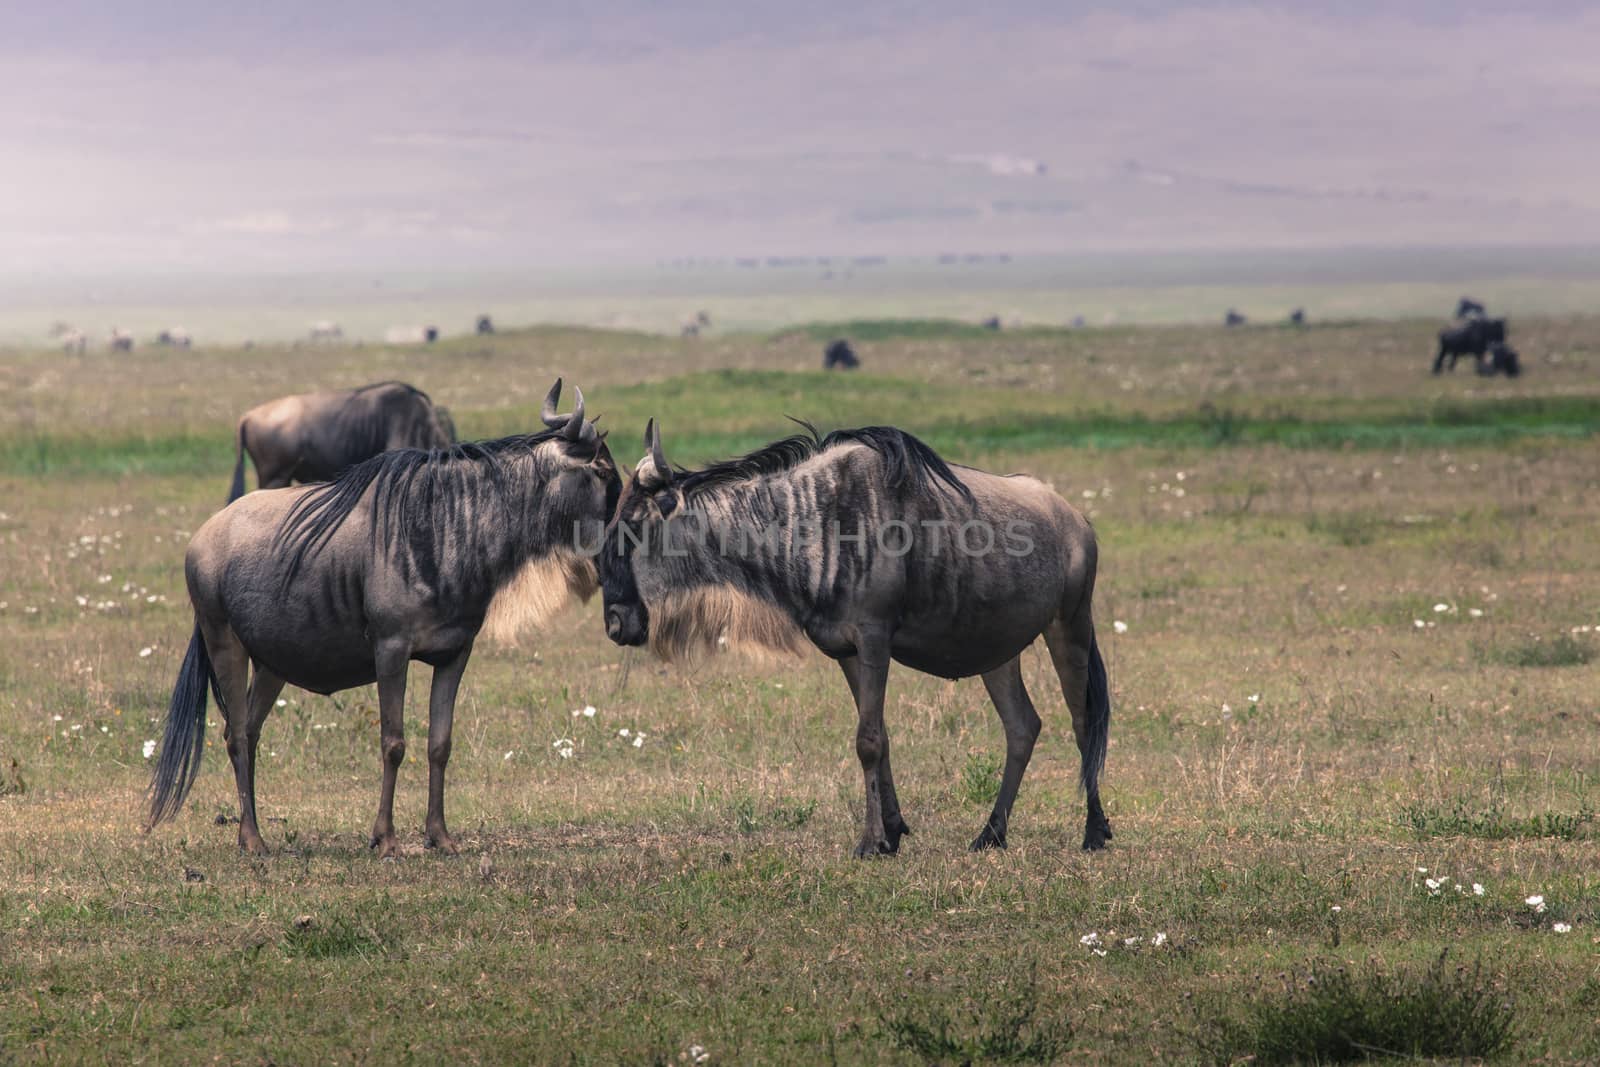 A Wildebeest mother and newly born calf, Ngorongoro Crater, Tanz by mariusz_prusaczyk